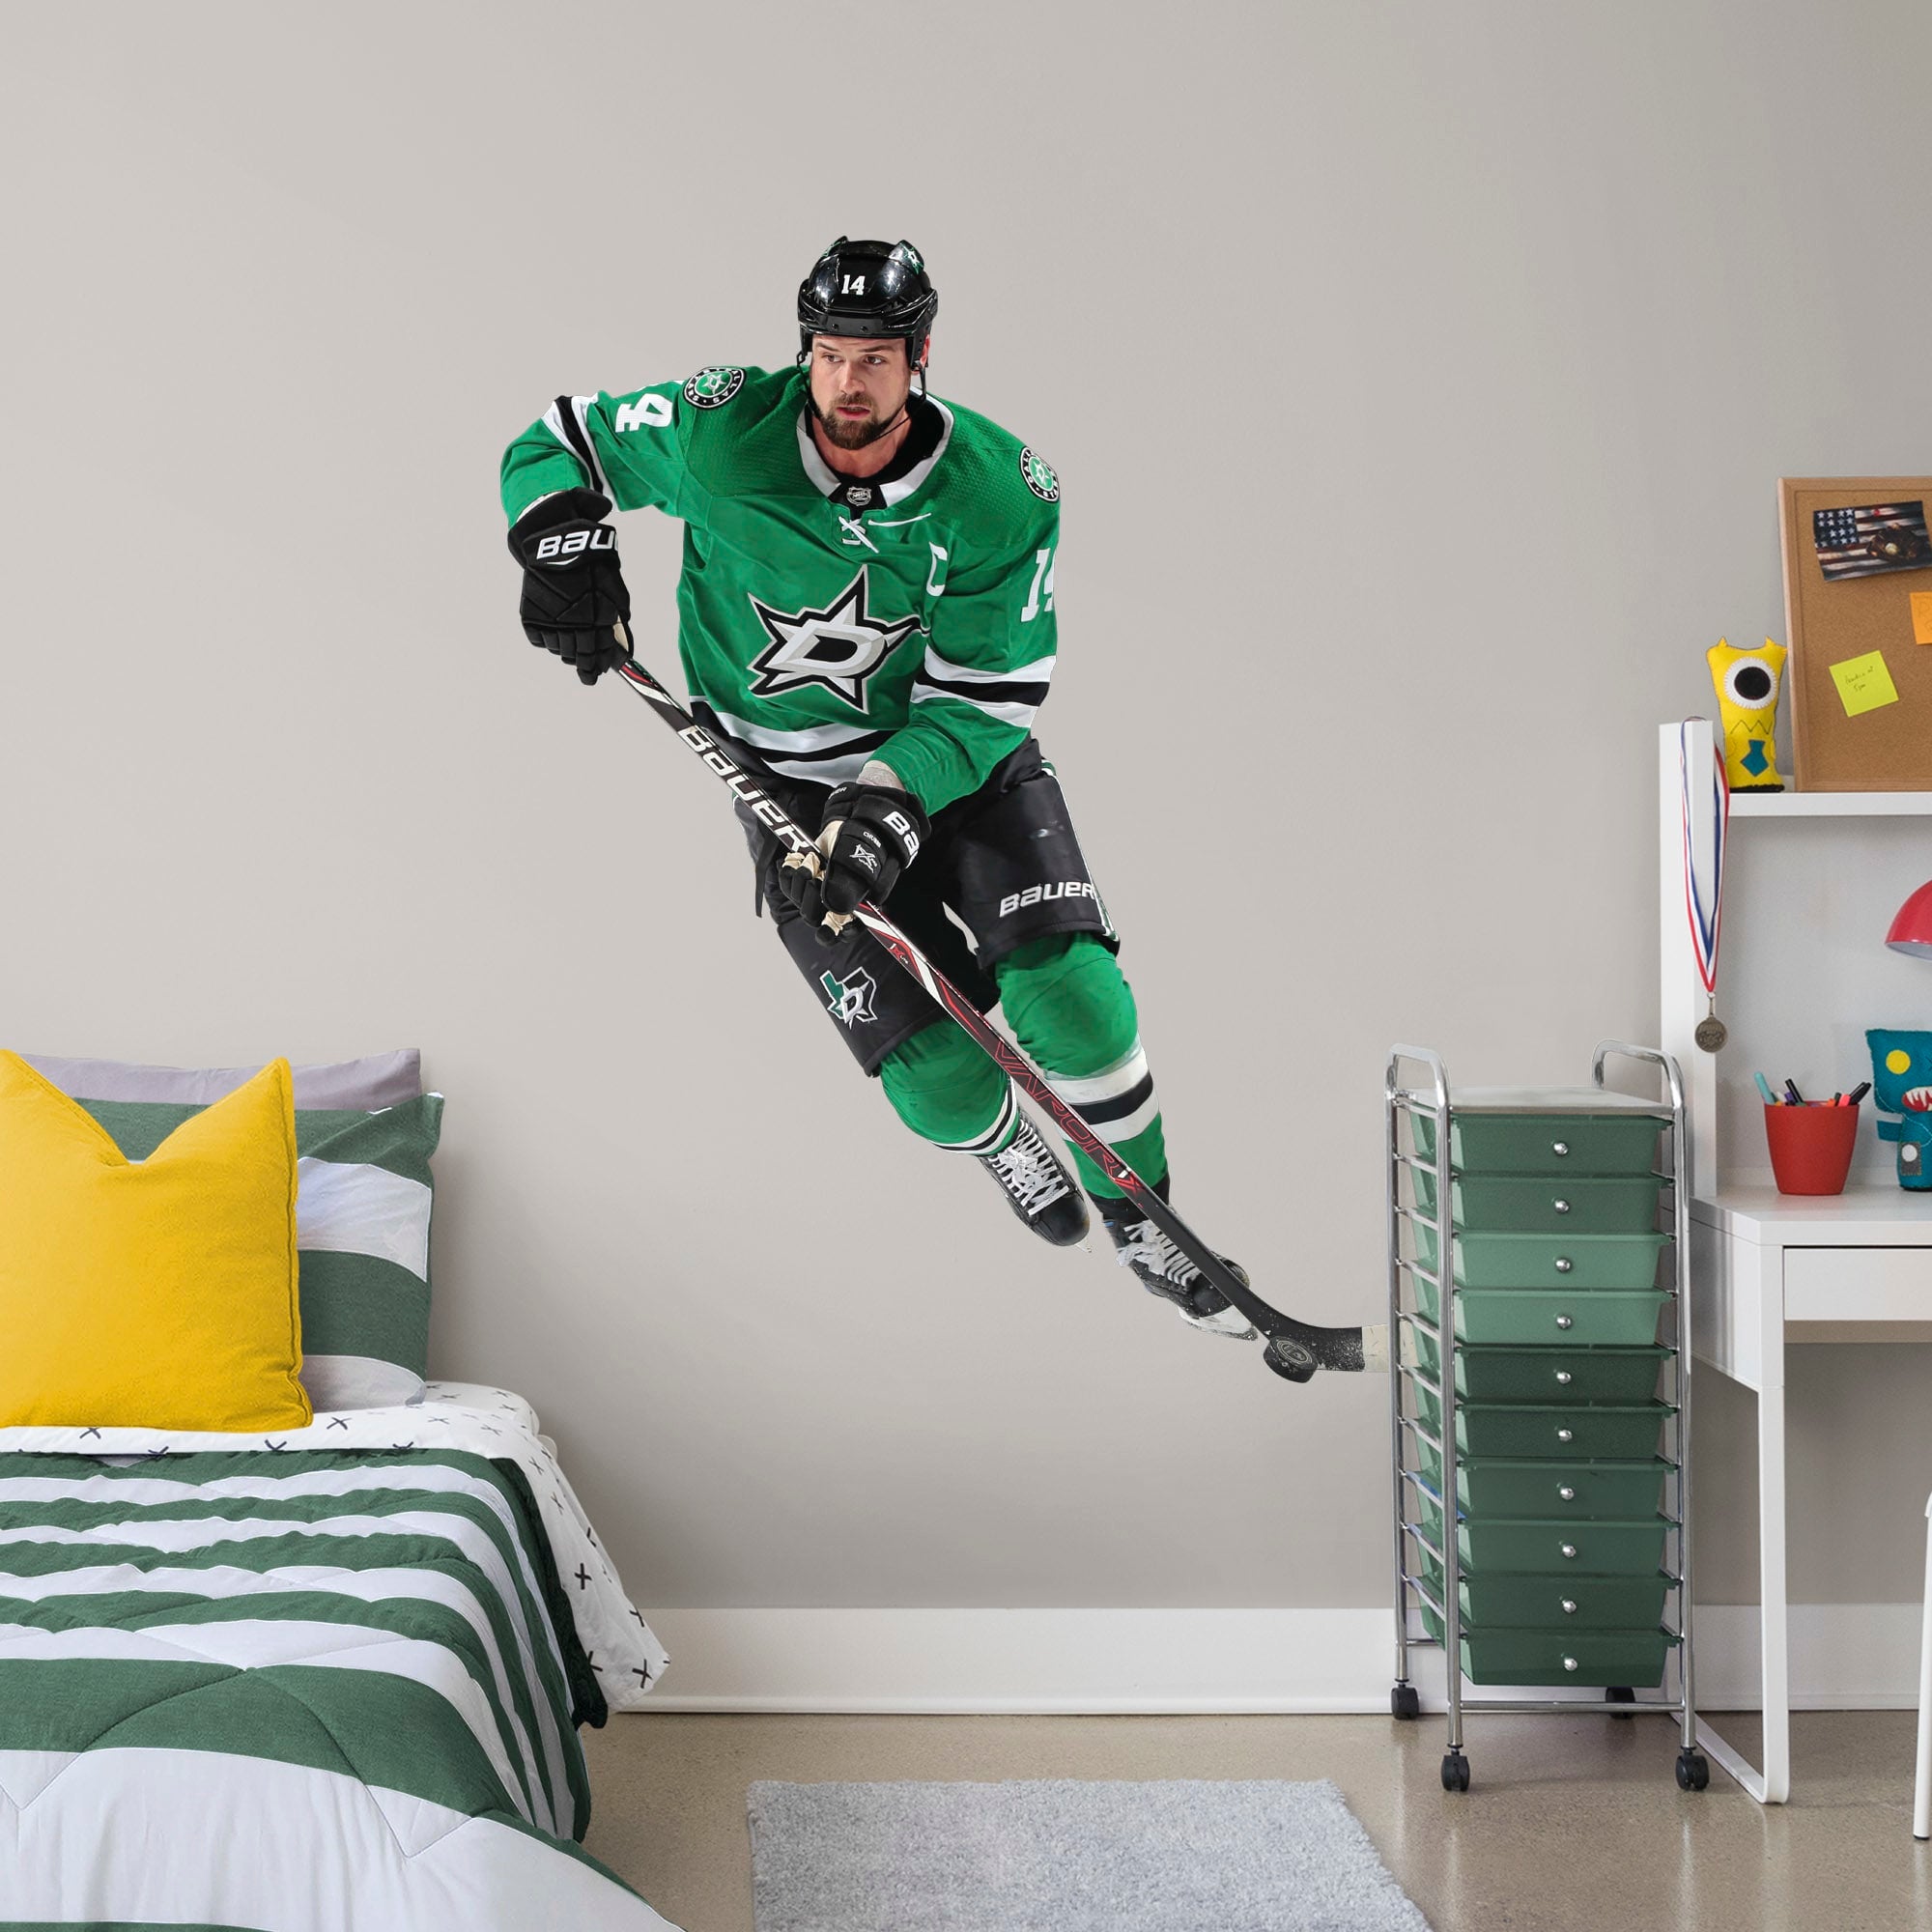 Jamie Benn for Dallas Stars - Officially Licensed NHL Removable Wall Decal Life-Size Athlete + 2 Team Decals (62"W x 73"H) by Fa